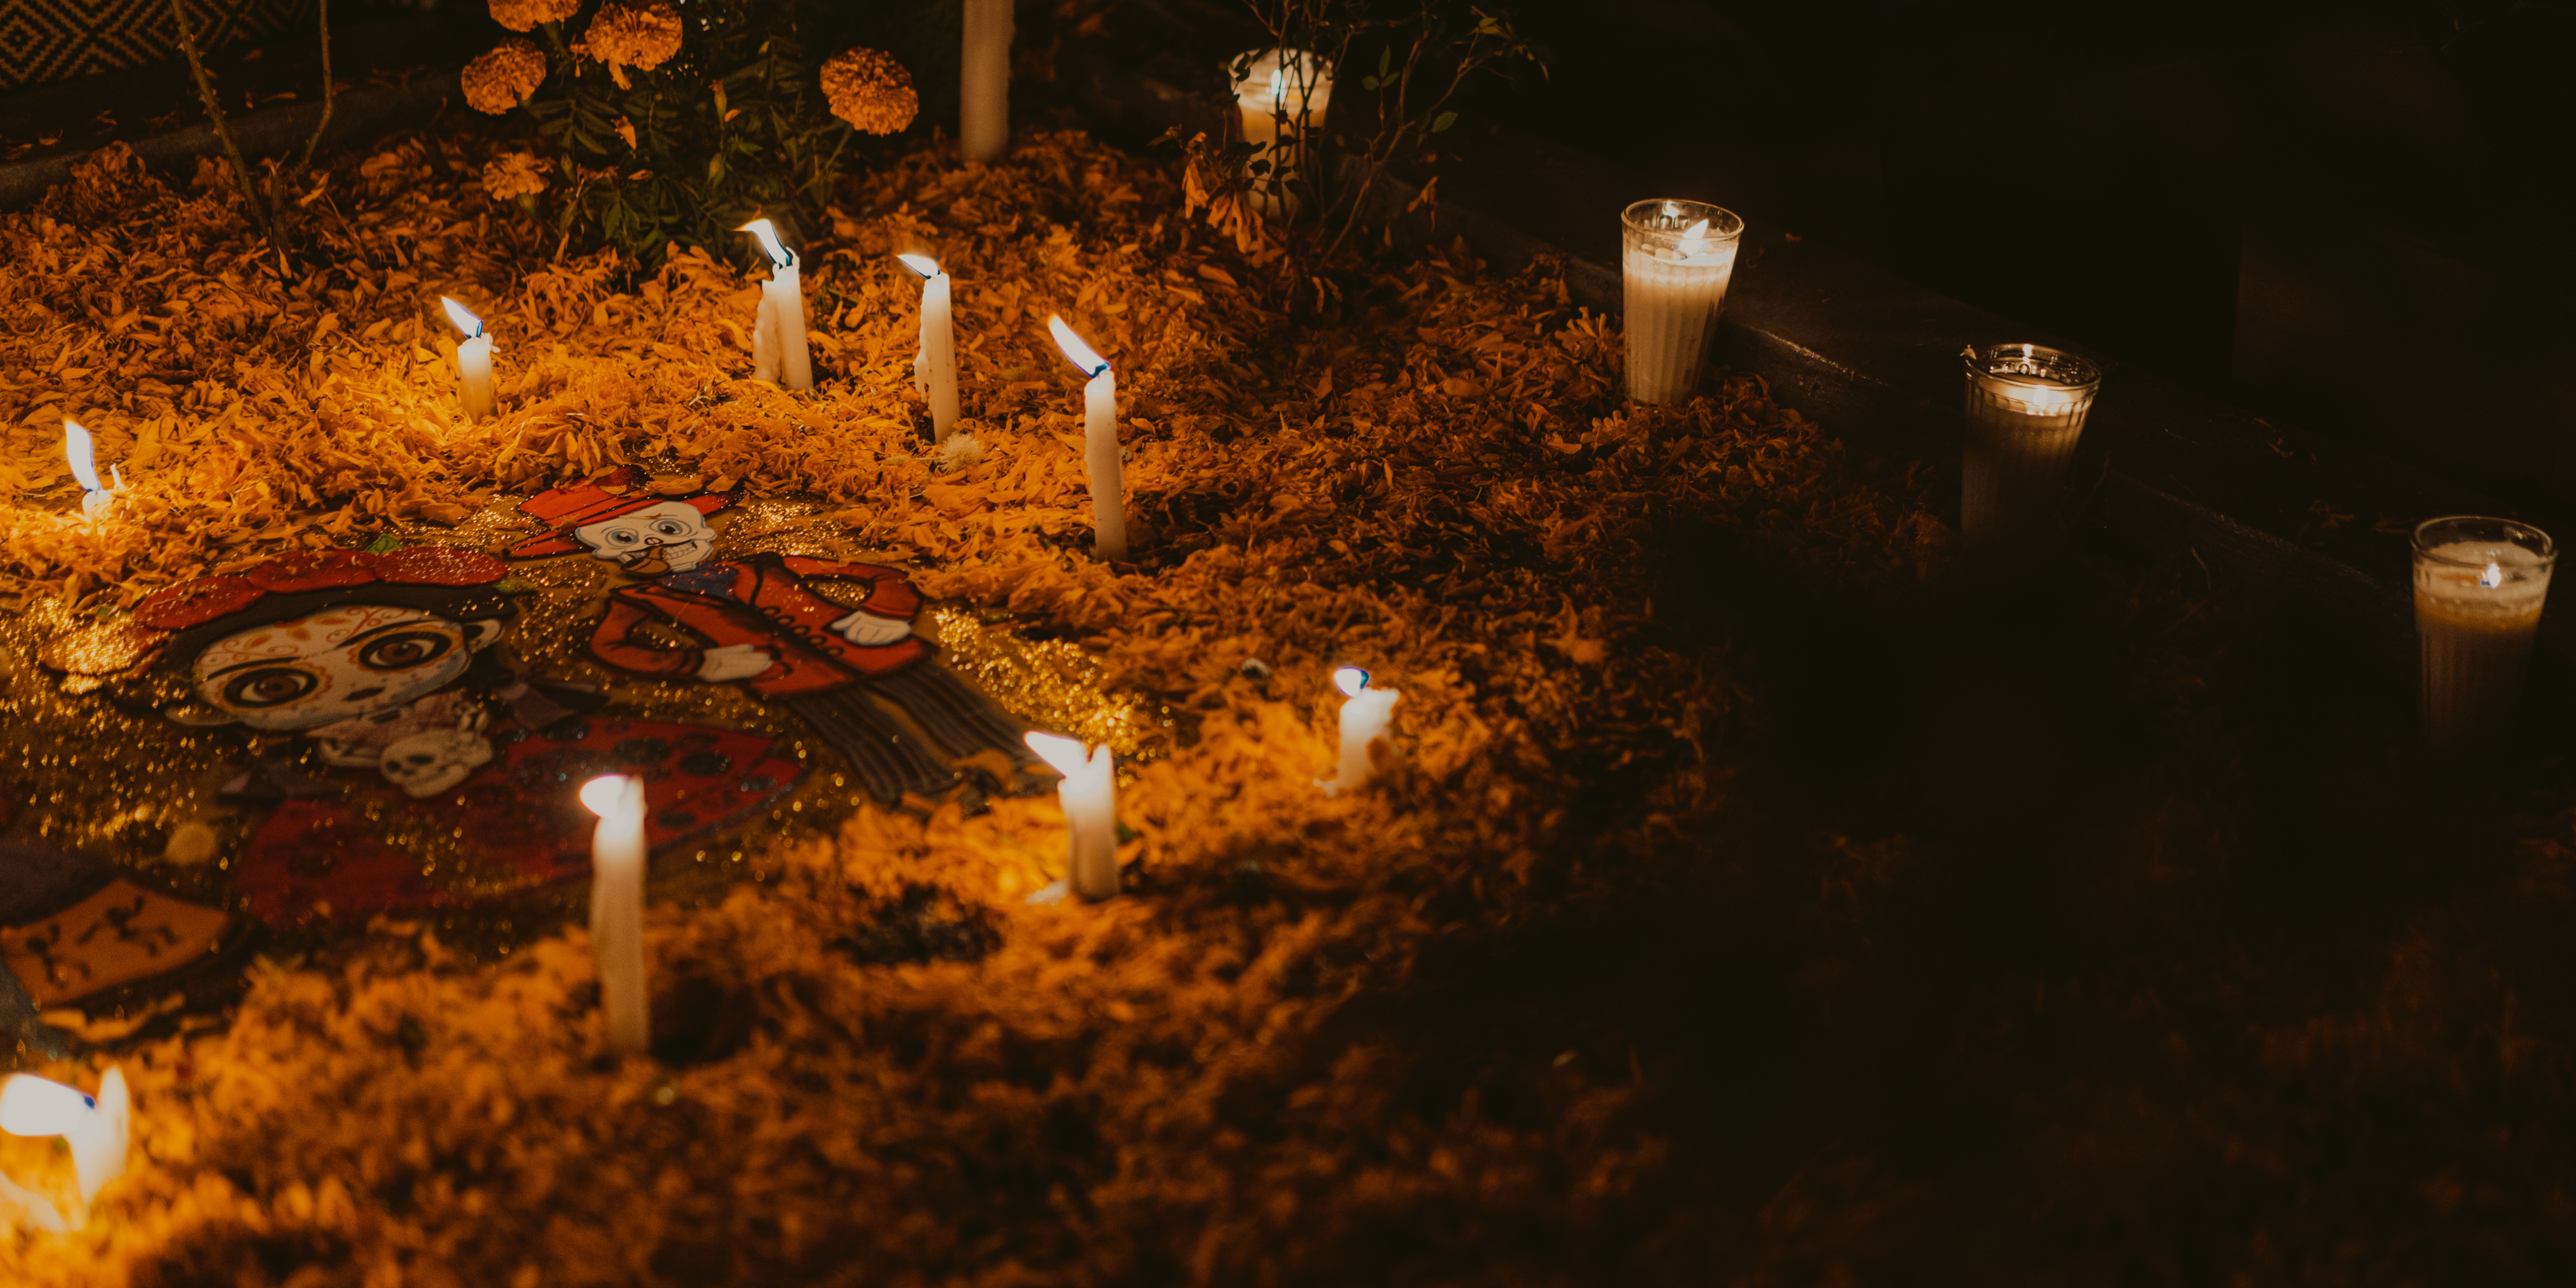 Día de Muertos: everything you need to know about Mexico’s Day of the Dead